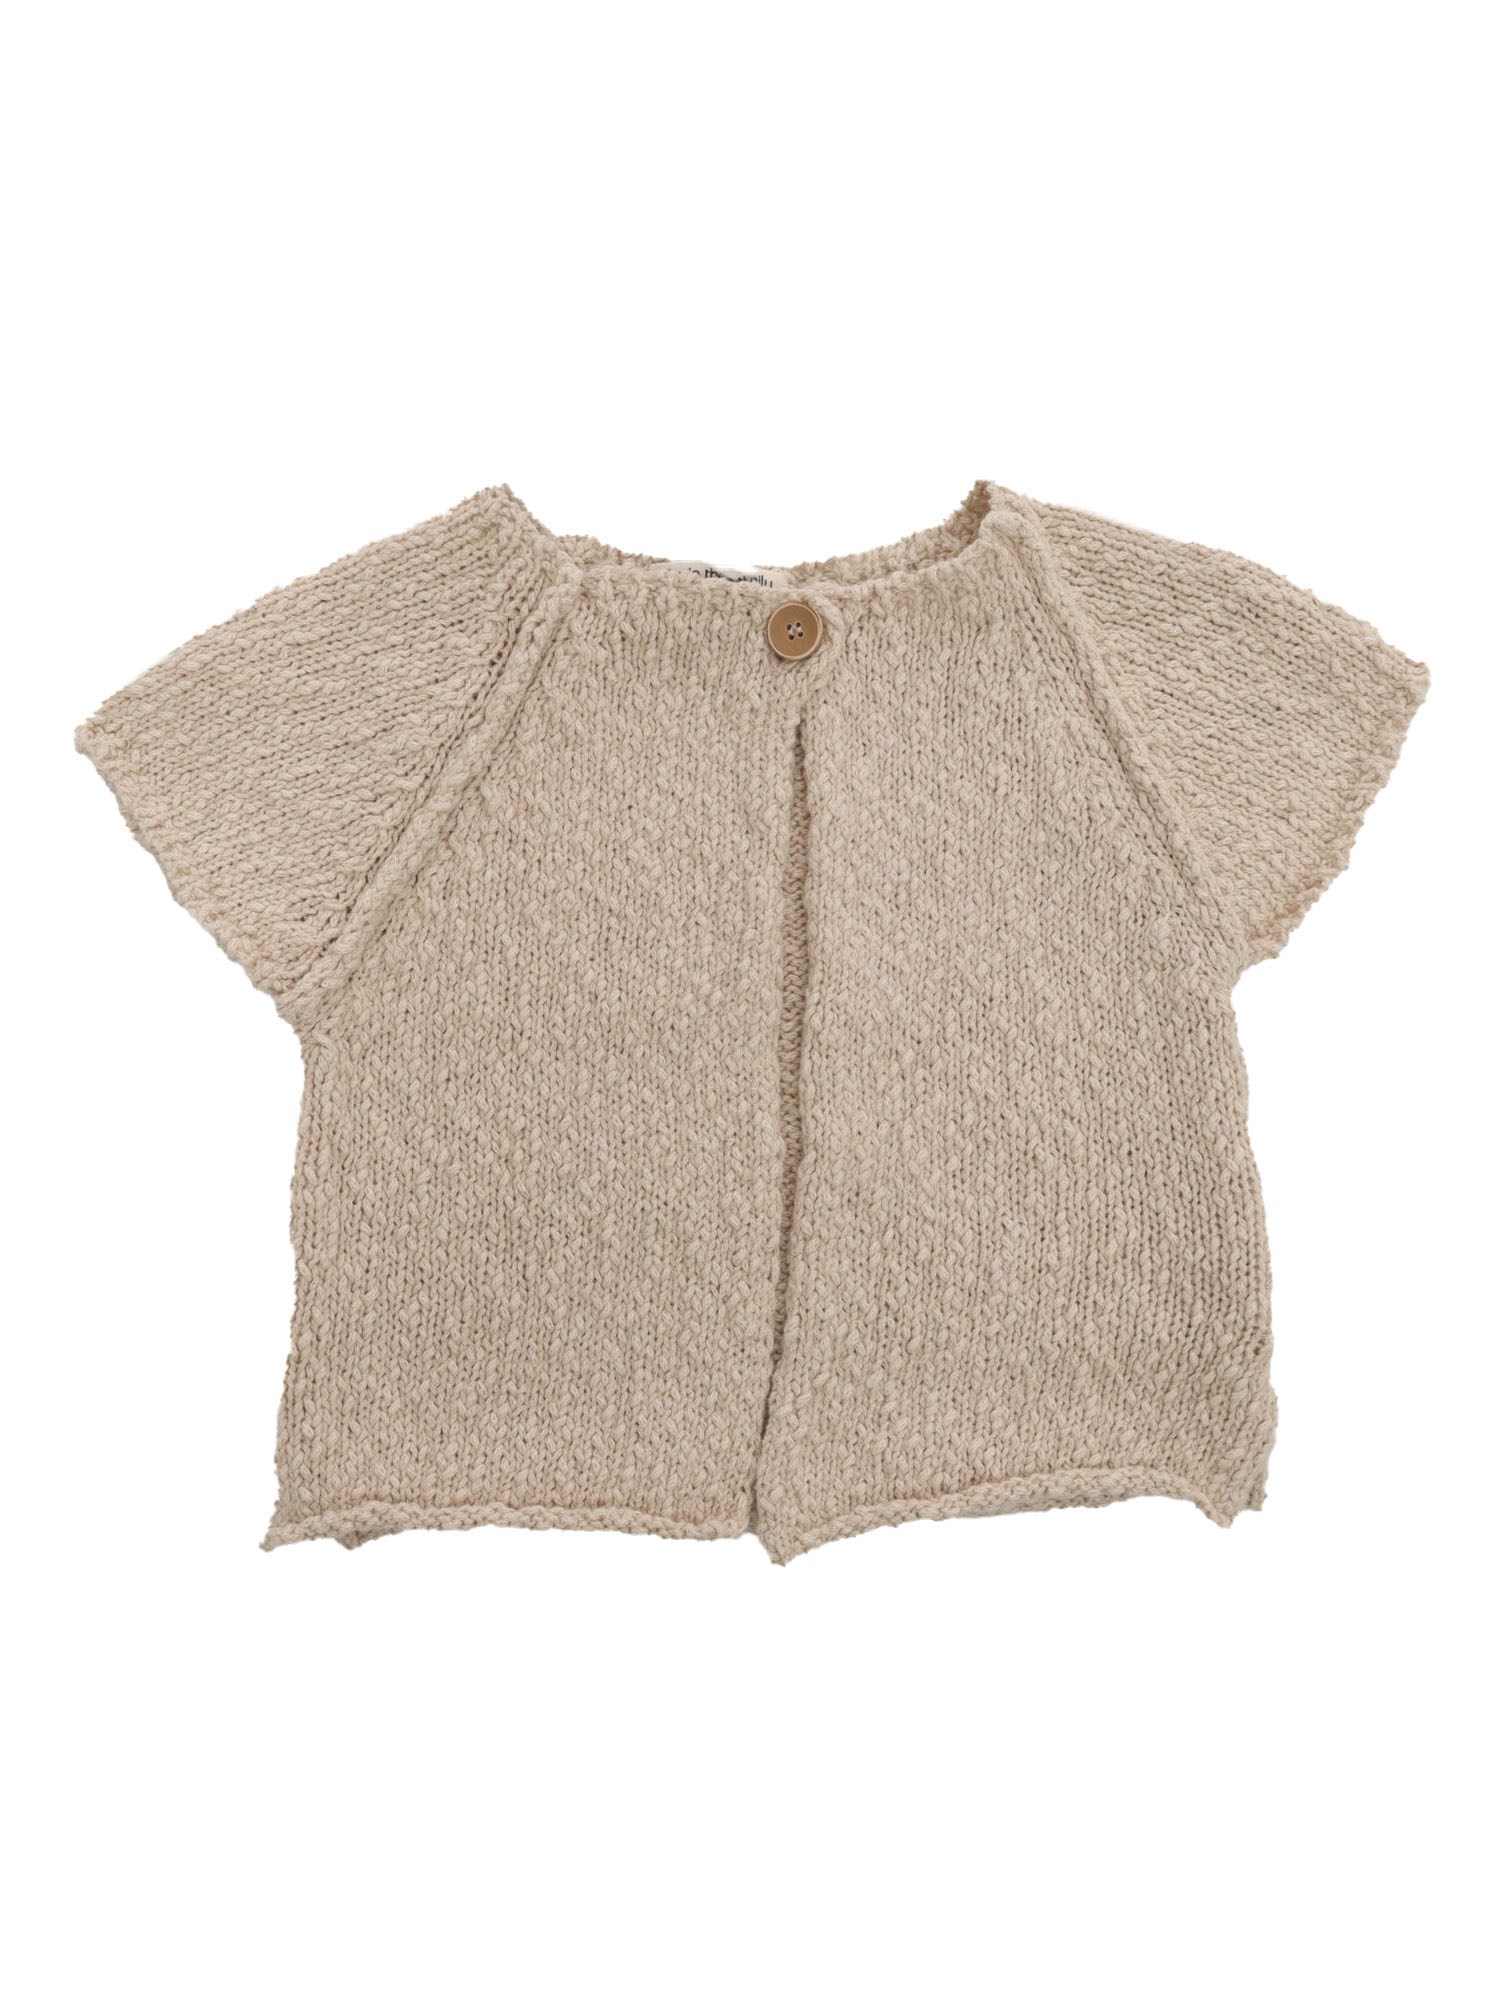 One More In The Family Sleevless Jumper In Beige